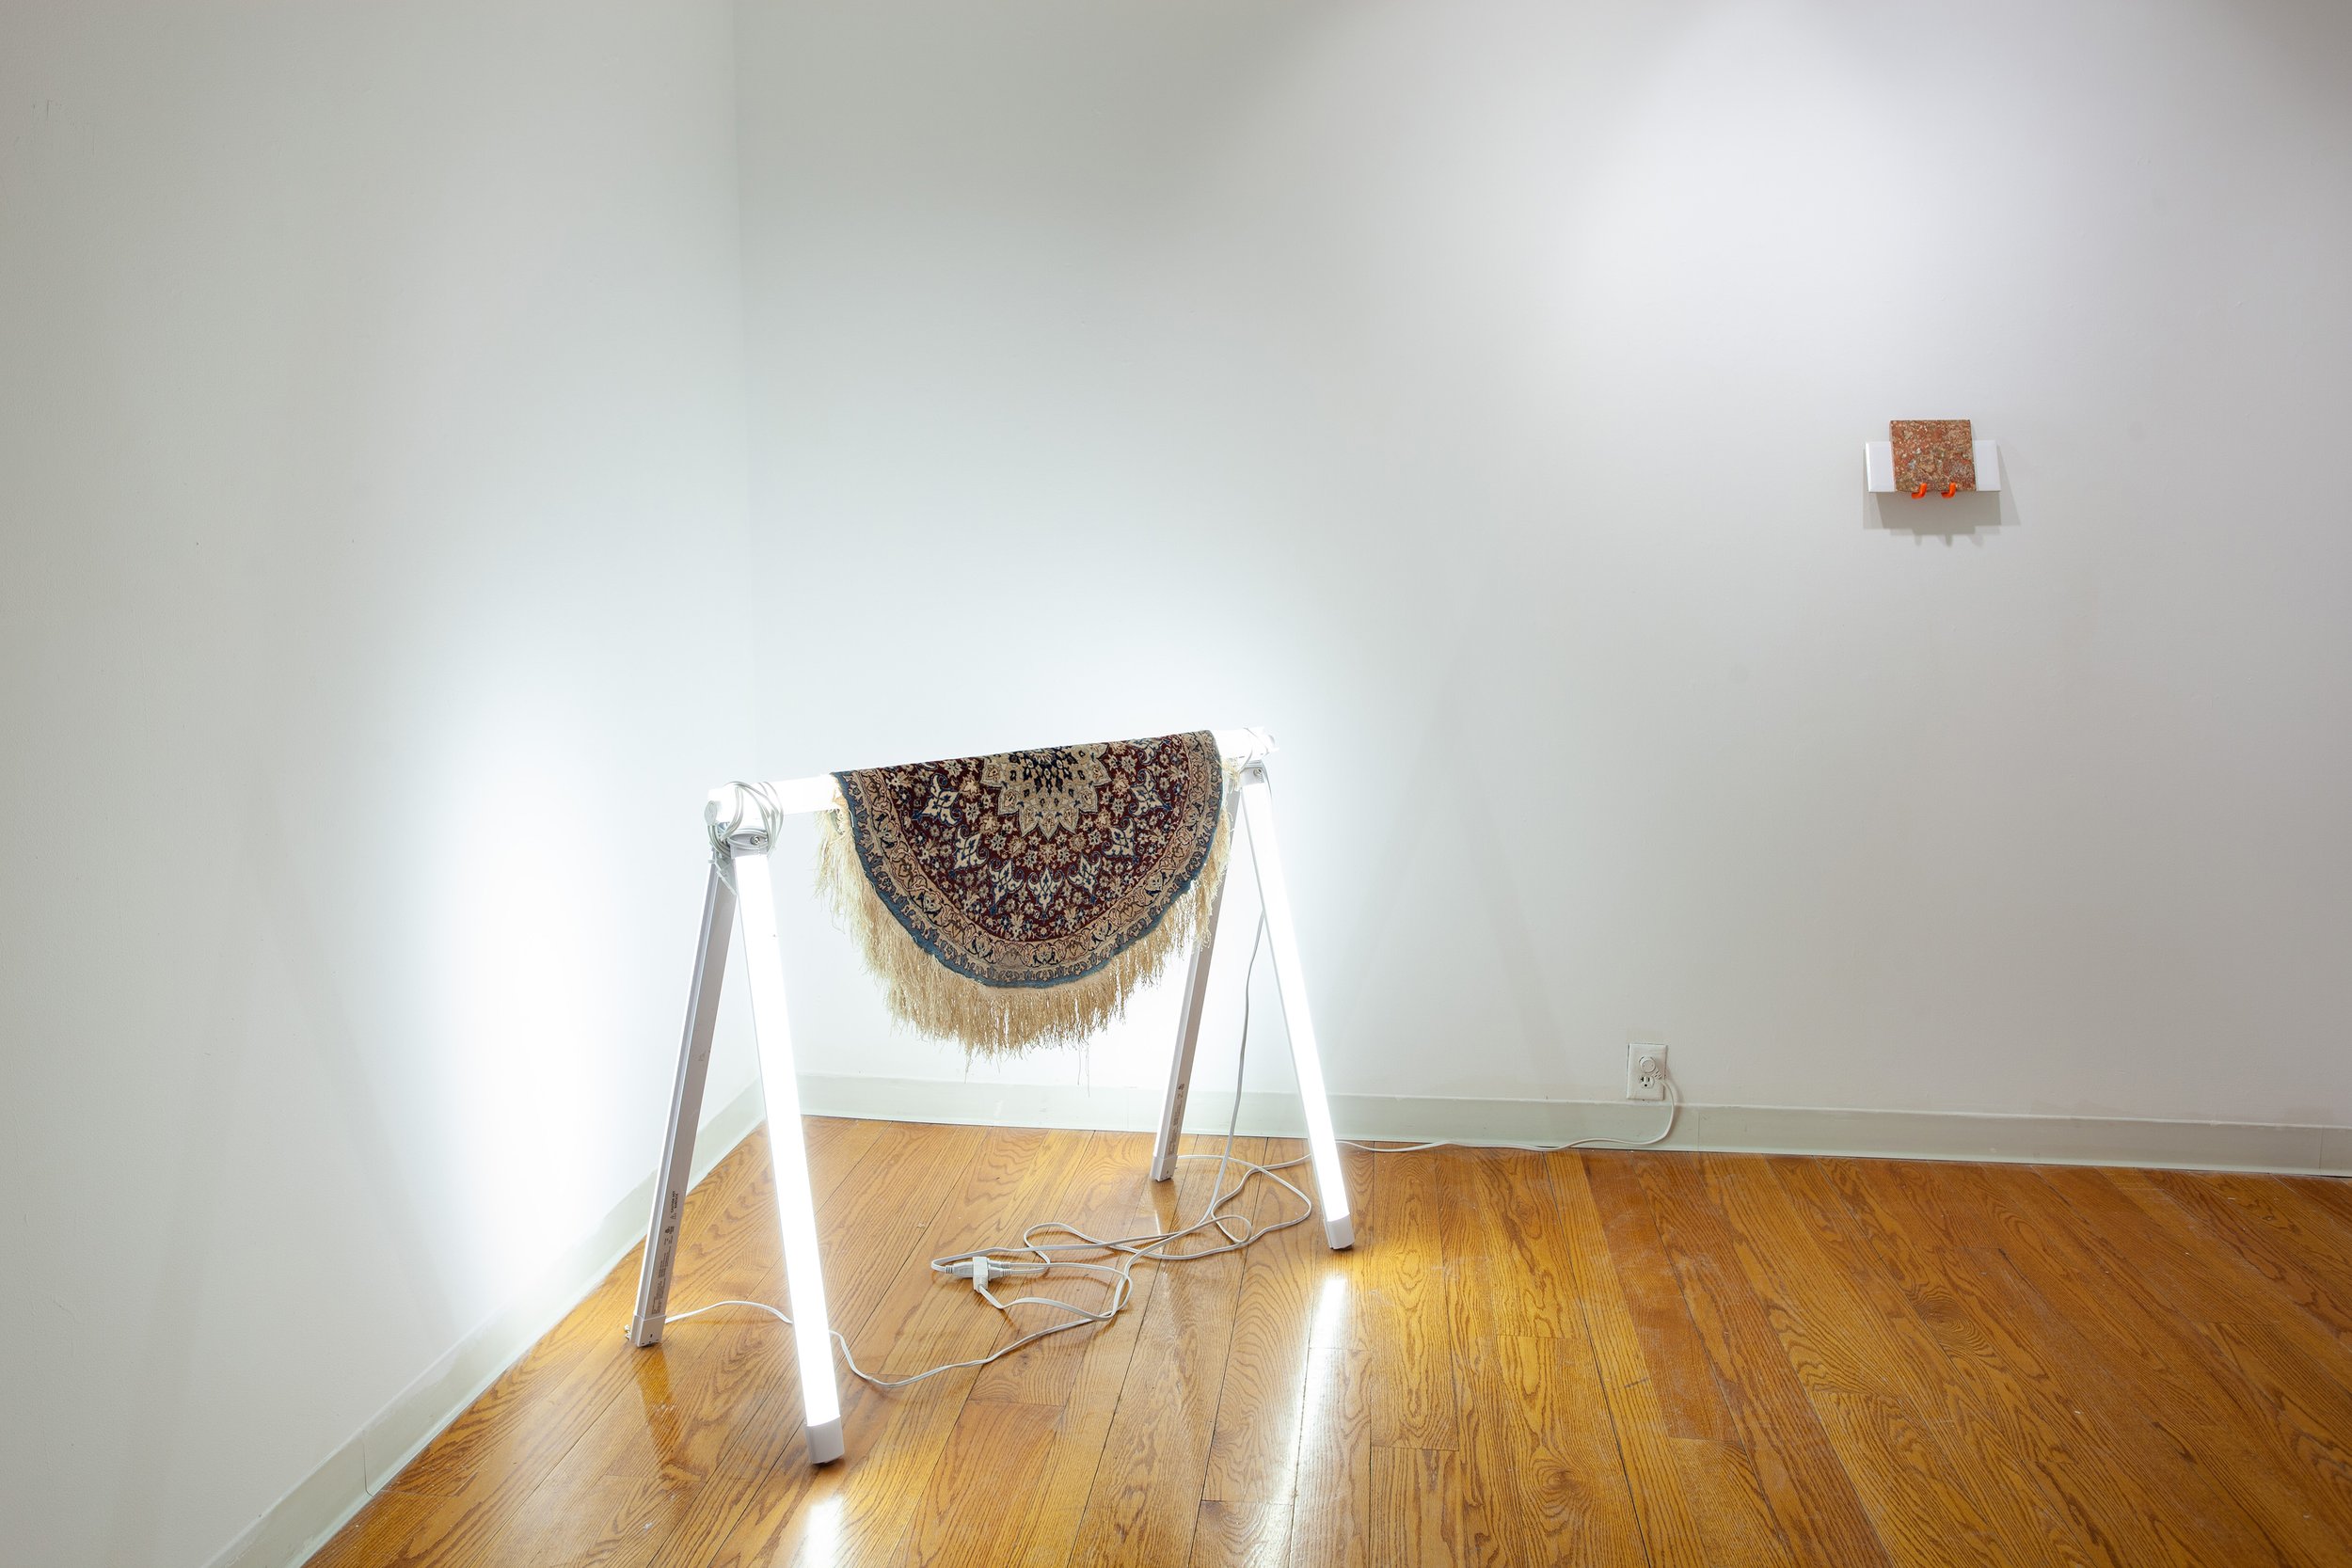   Sawhorse (for working),  2022, LED lights, Persian silk carpet, ceramic, 24 x 52 x 30 inches 